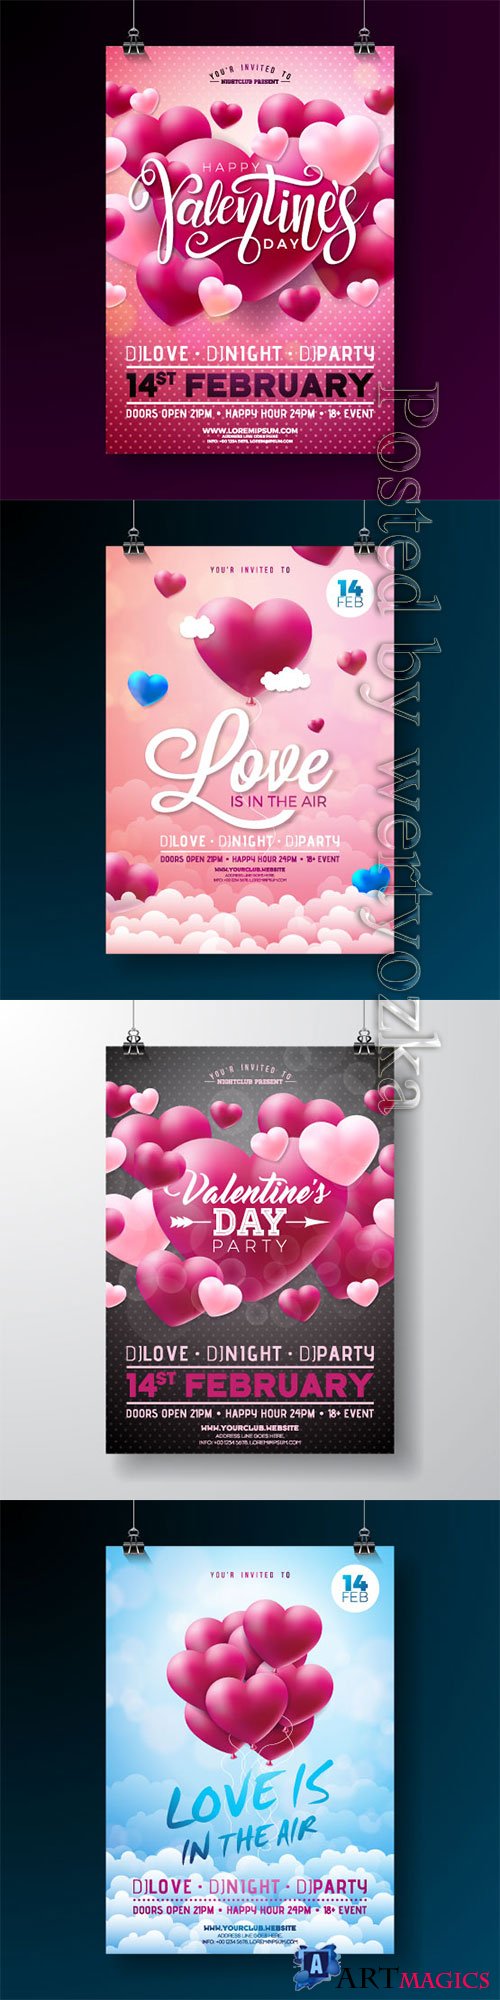 Vector Valentines day party flyer design with love